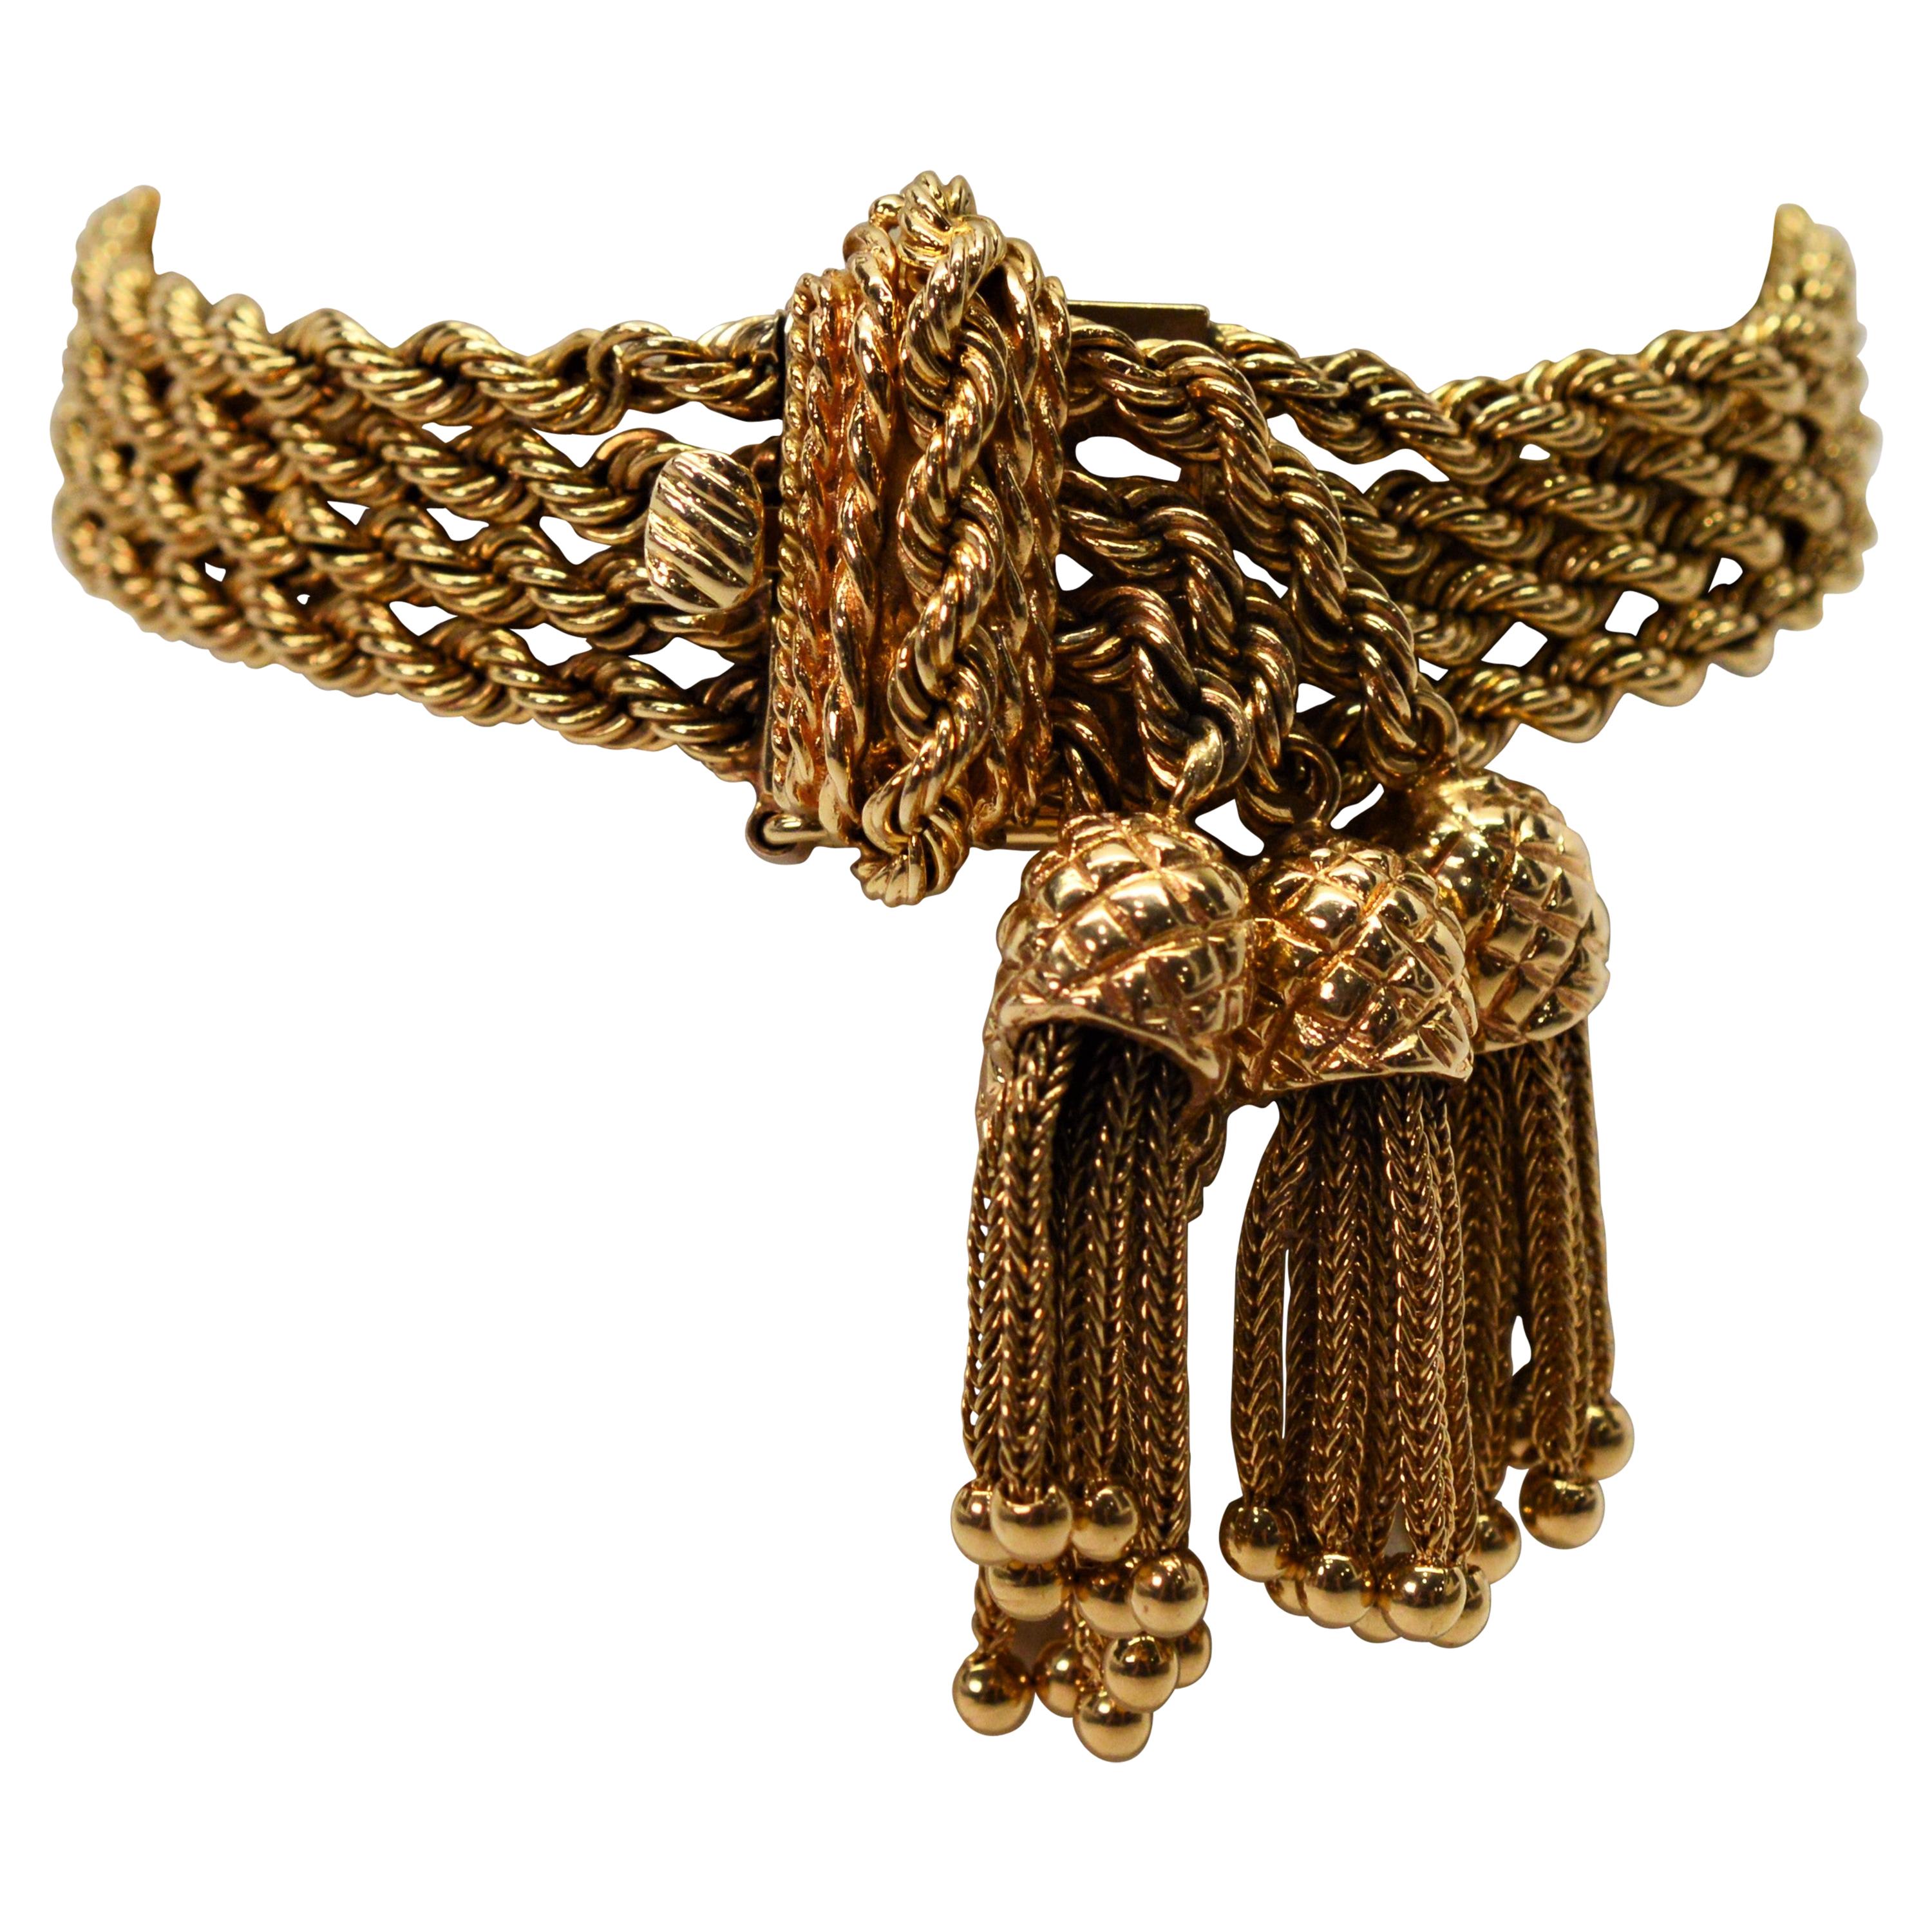 Four-Strand 14K Yellow Gold Rope Bracelet with Pineapple Charm Tassels